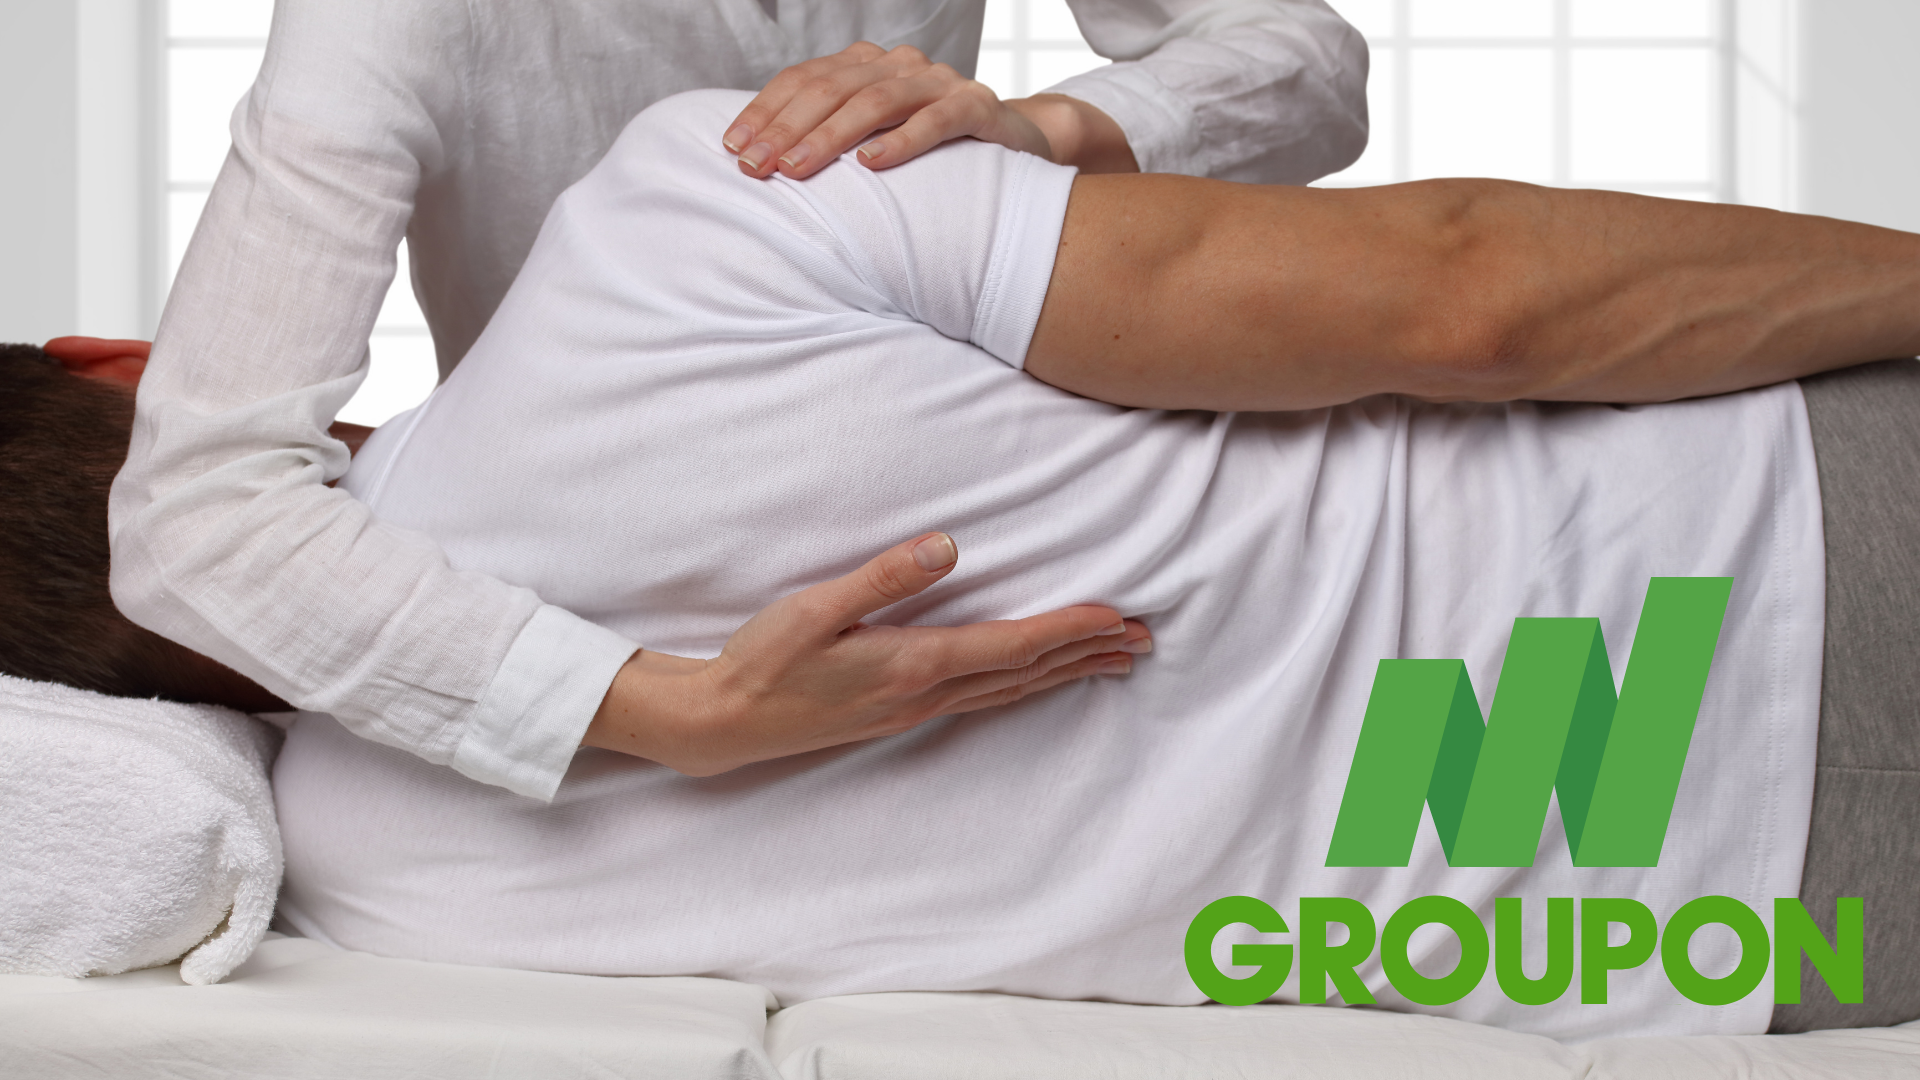 fhlf groupon and chiropractic services